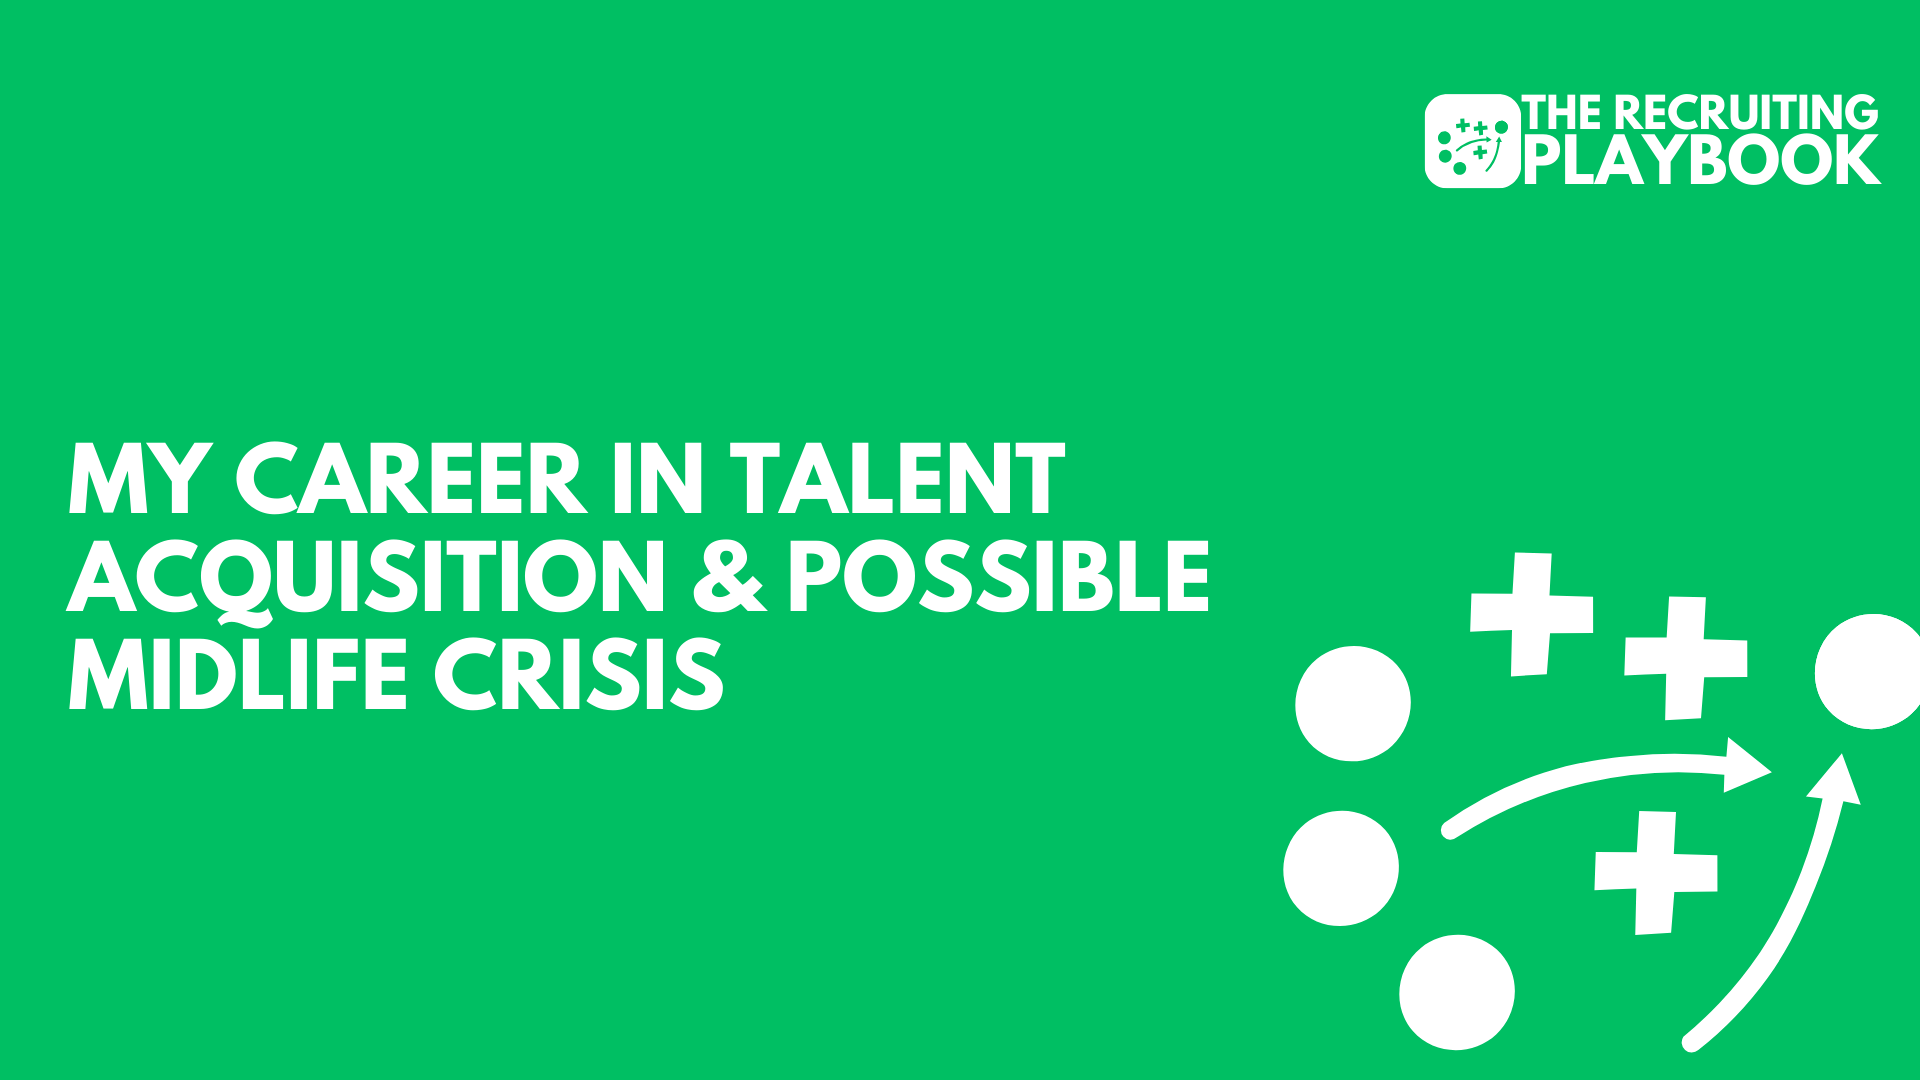 My Career In Talent Acquisition & Possible Midlife Crisis